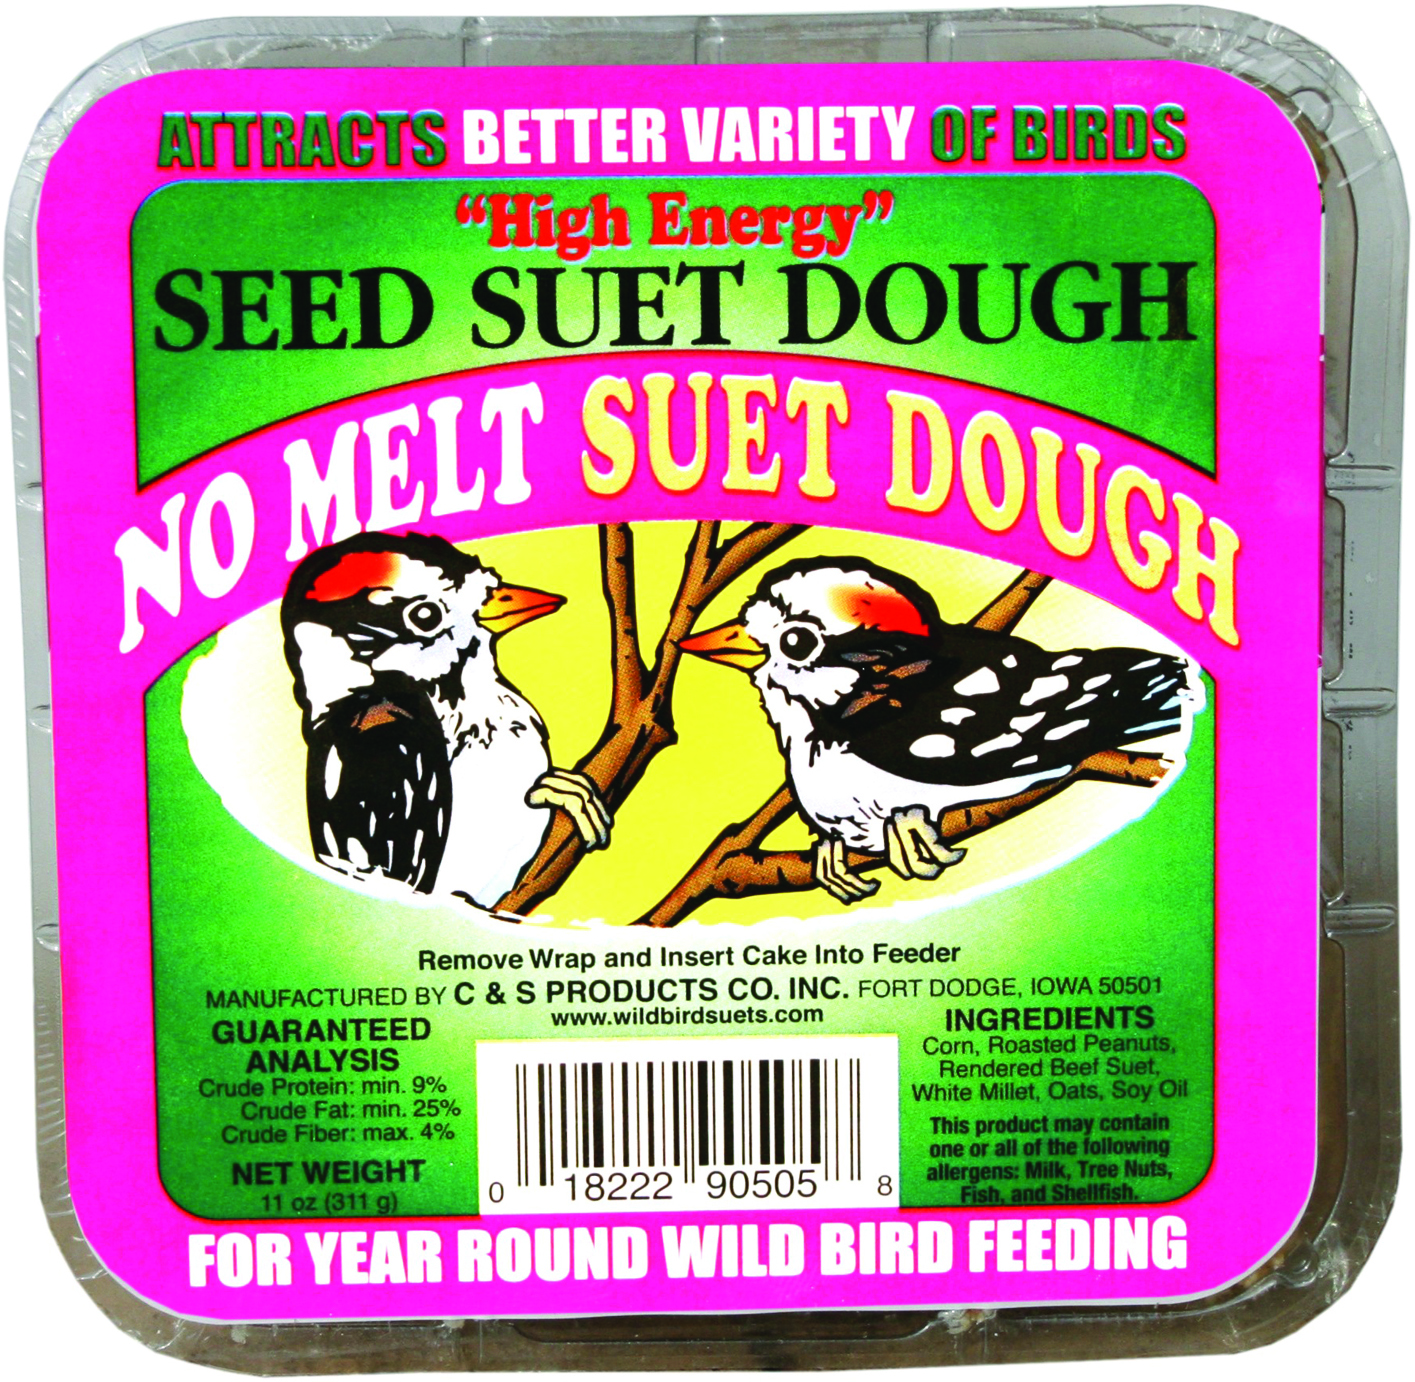 SEED & SUET DOUGH PICTURE LABEL